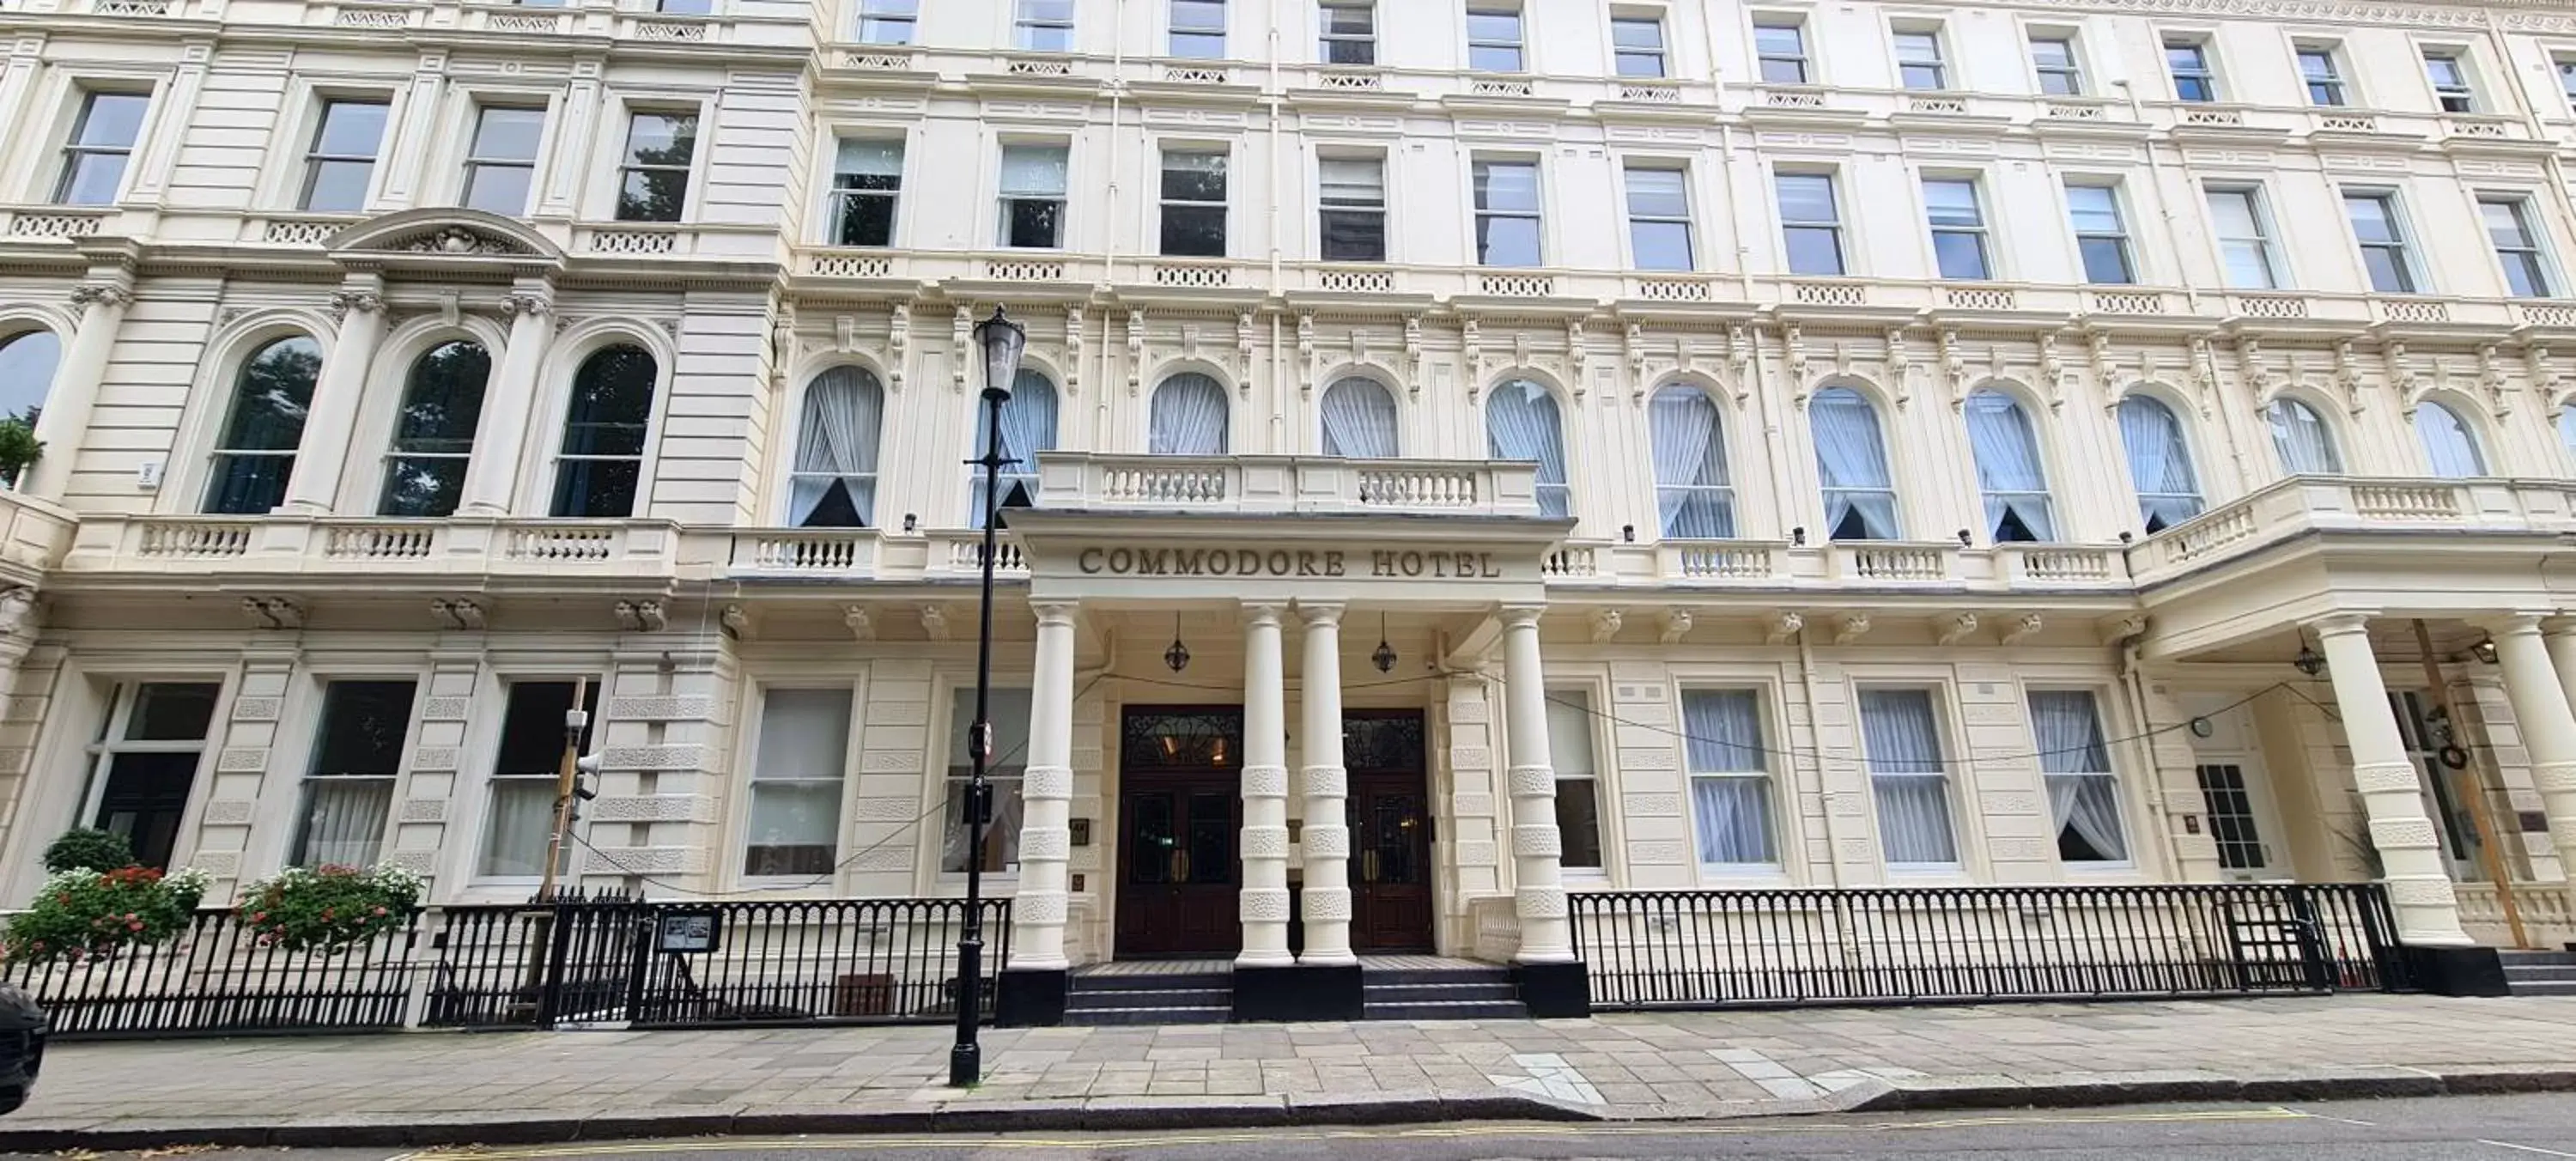 Property Building in Commodore Hotel